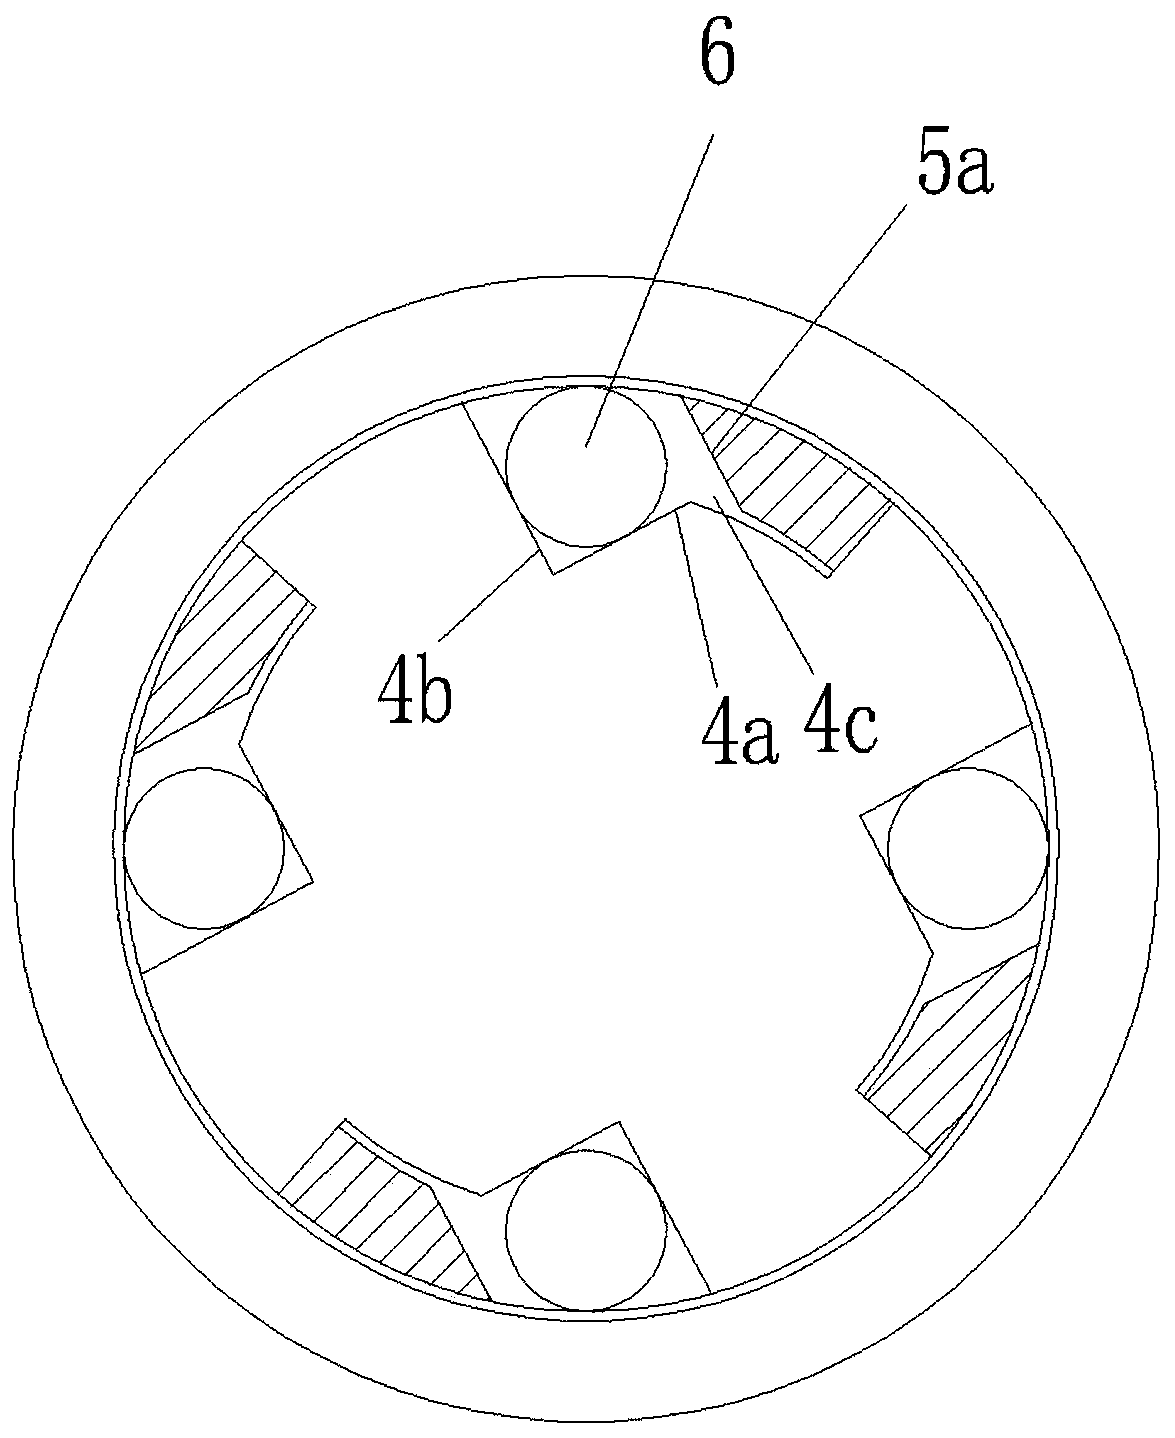 Mechanism capable of realizing forward transmission for two-way driving and reverse transmission for one-way locking